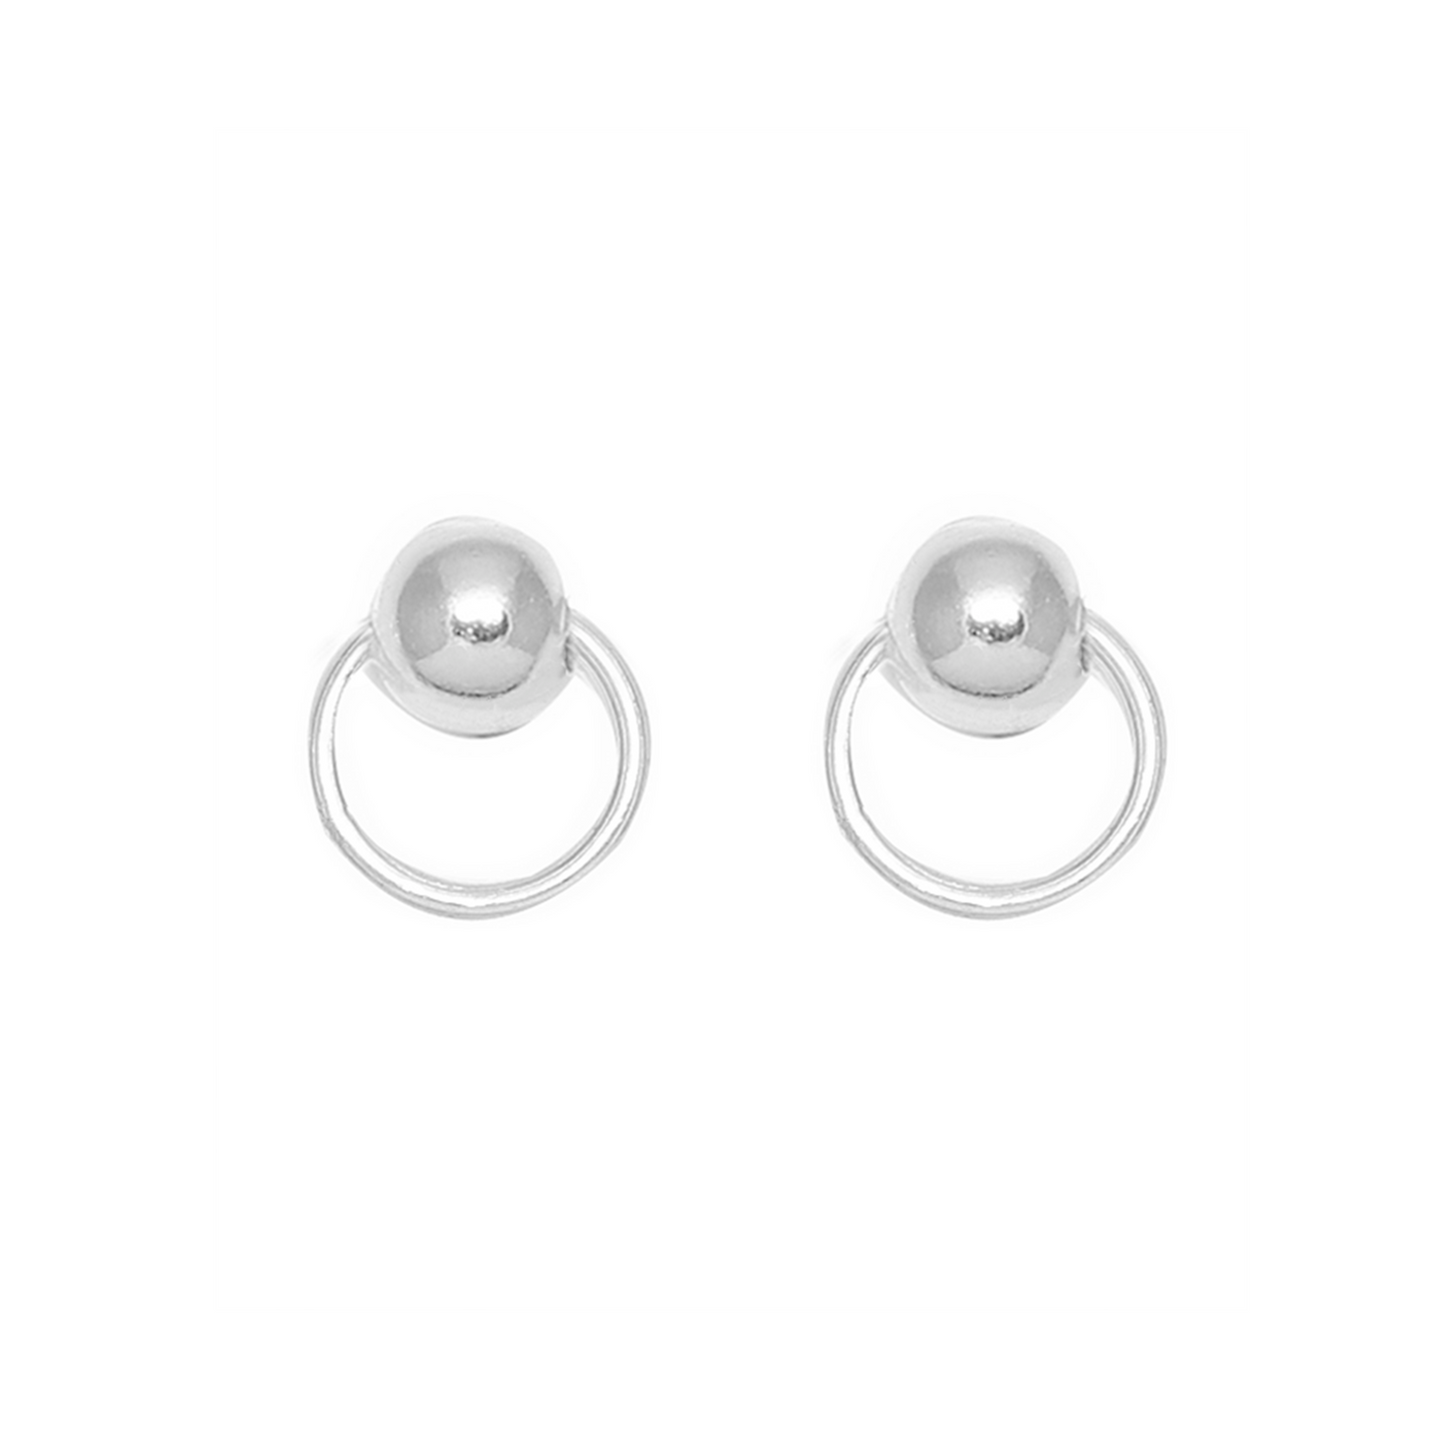 Sterling Silver Disc Earrings with Bead Ball and Circle Design